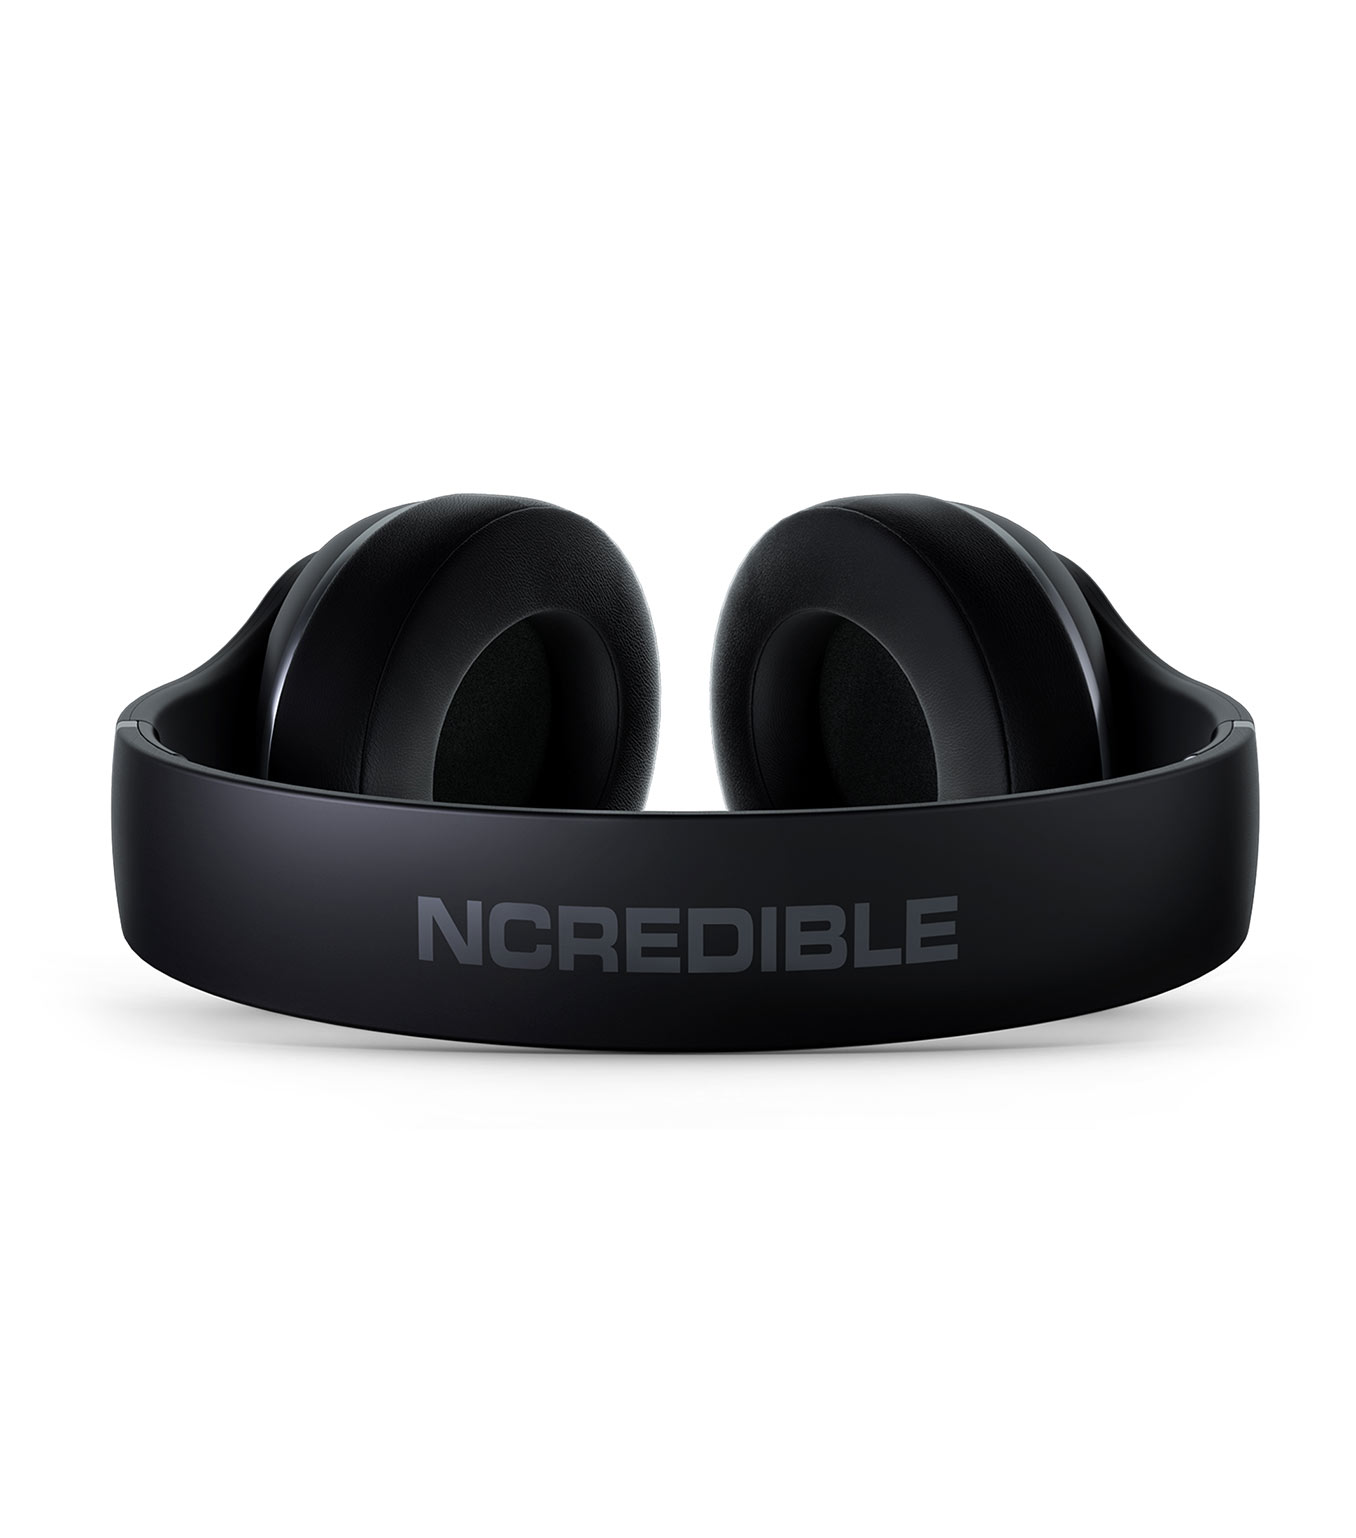 NCredible2 Wireless On-Ear Headphones, Built-in Mic, Wired Mode, Carrying Case - Black/Gunmetal